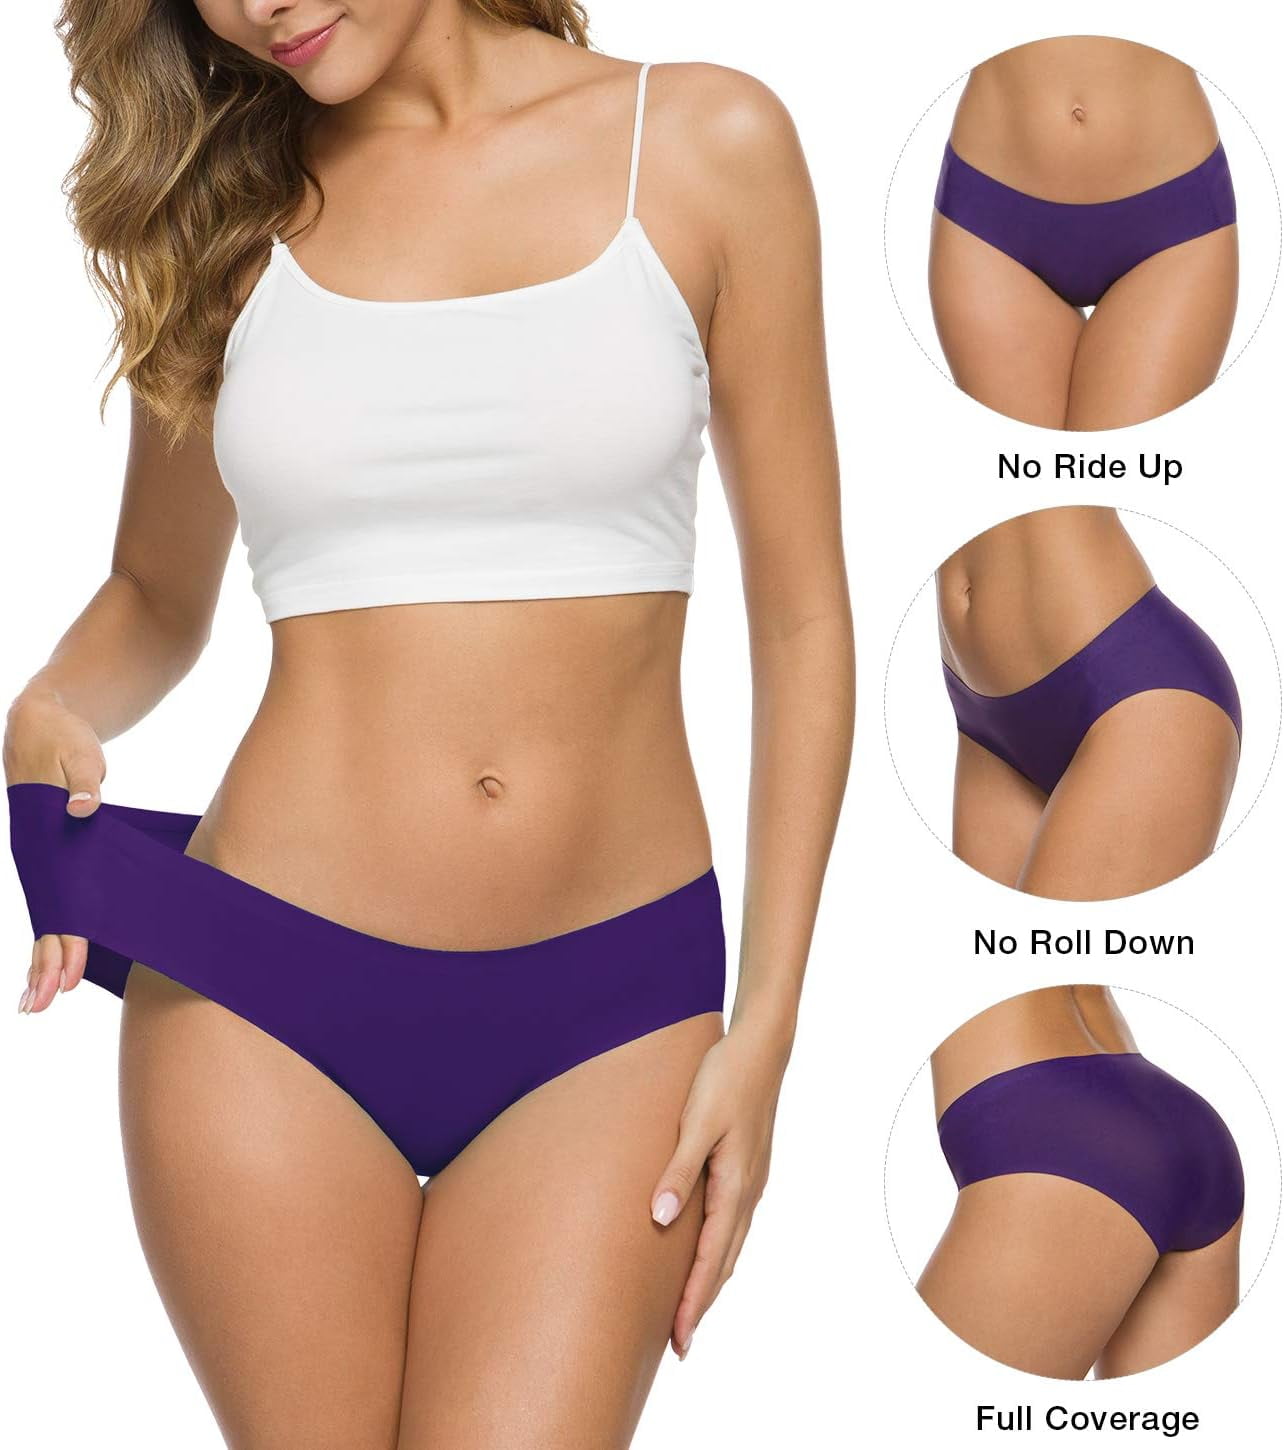 ALTHEANRAY Women's Seamless Hipster Underwear Review 